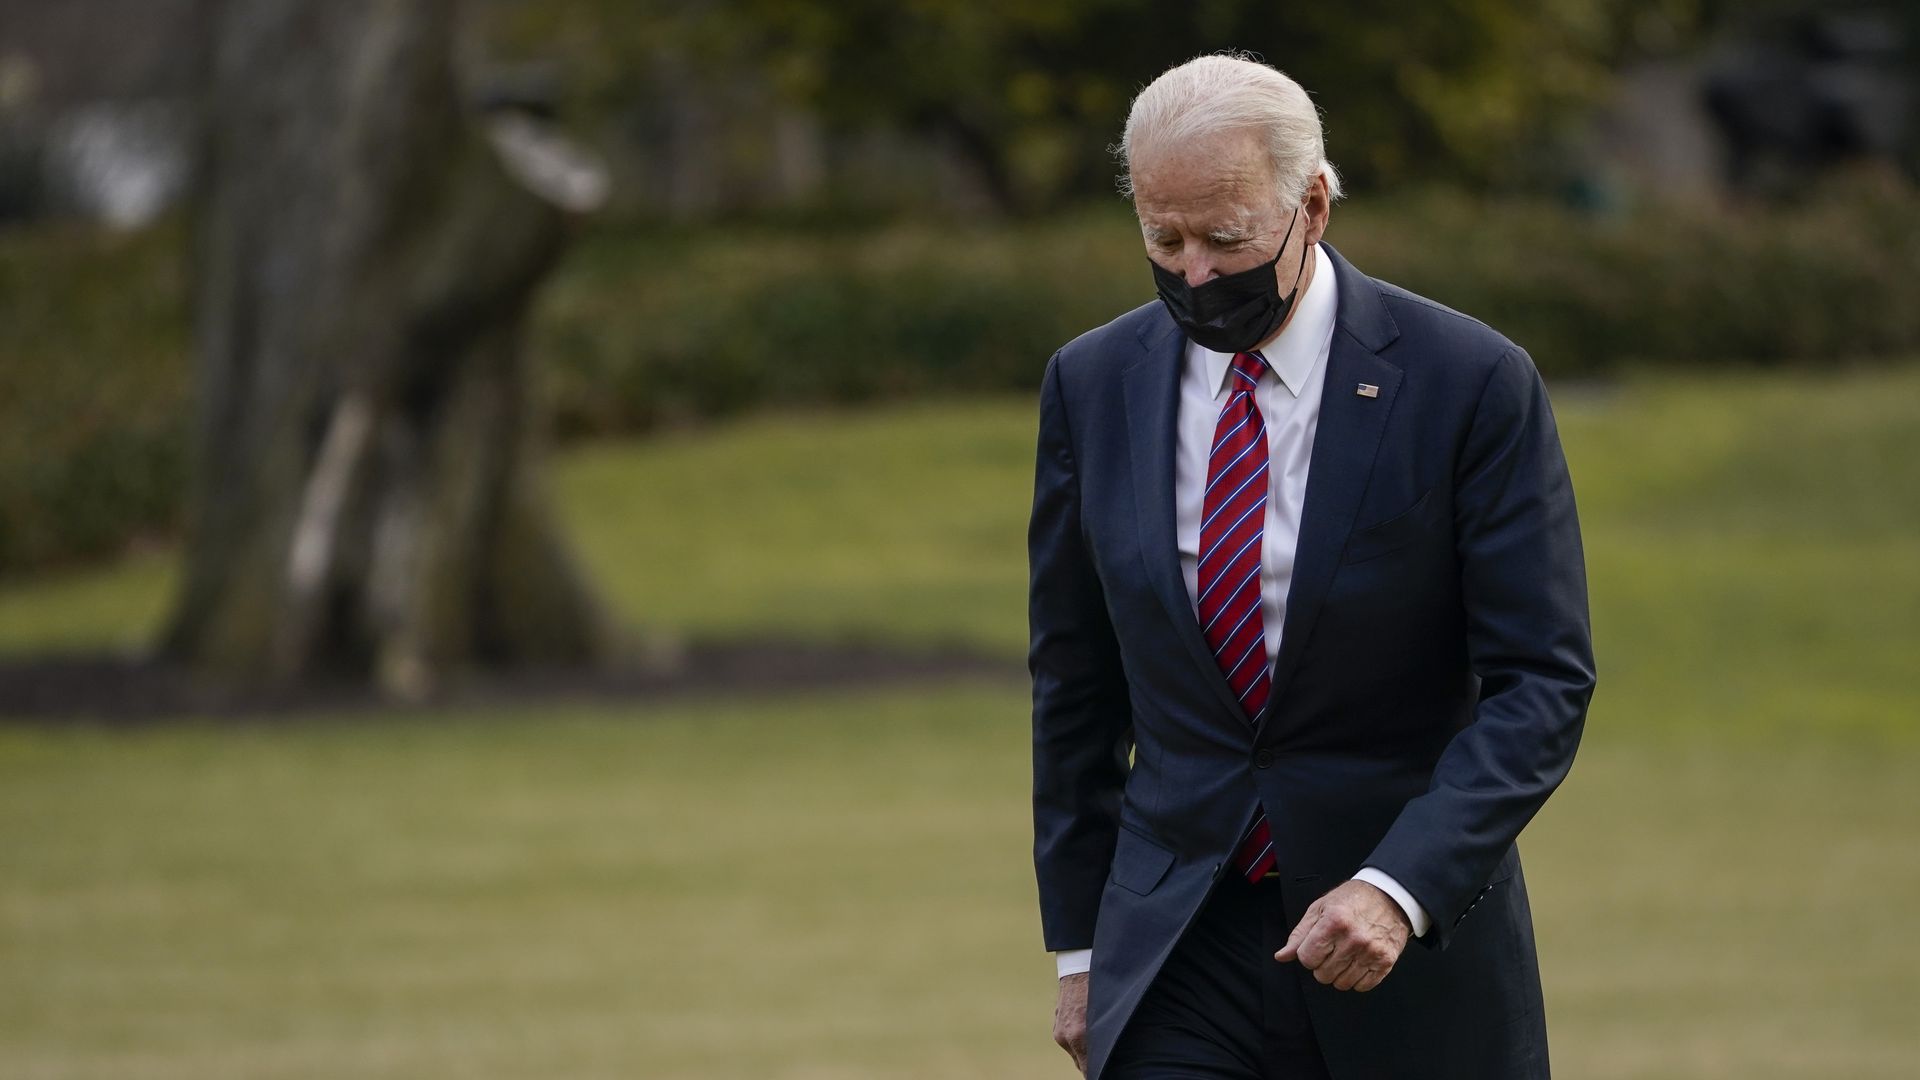 President Biden is seen walking back into the White House after arriving on Marine One.